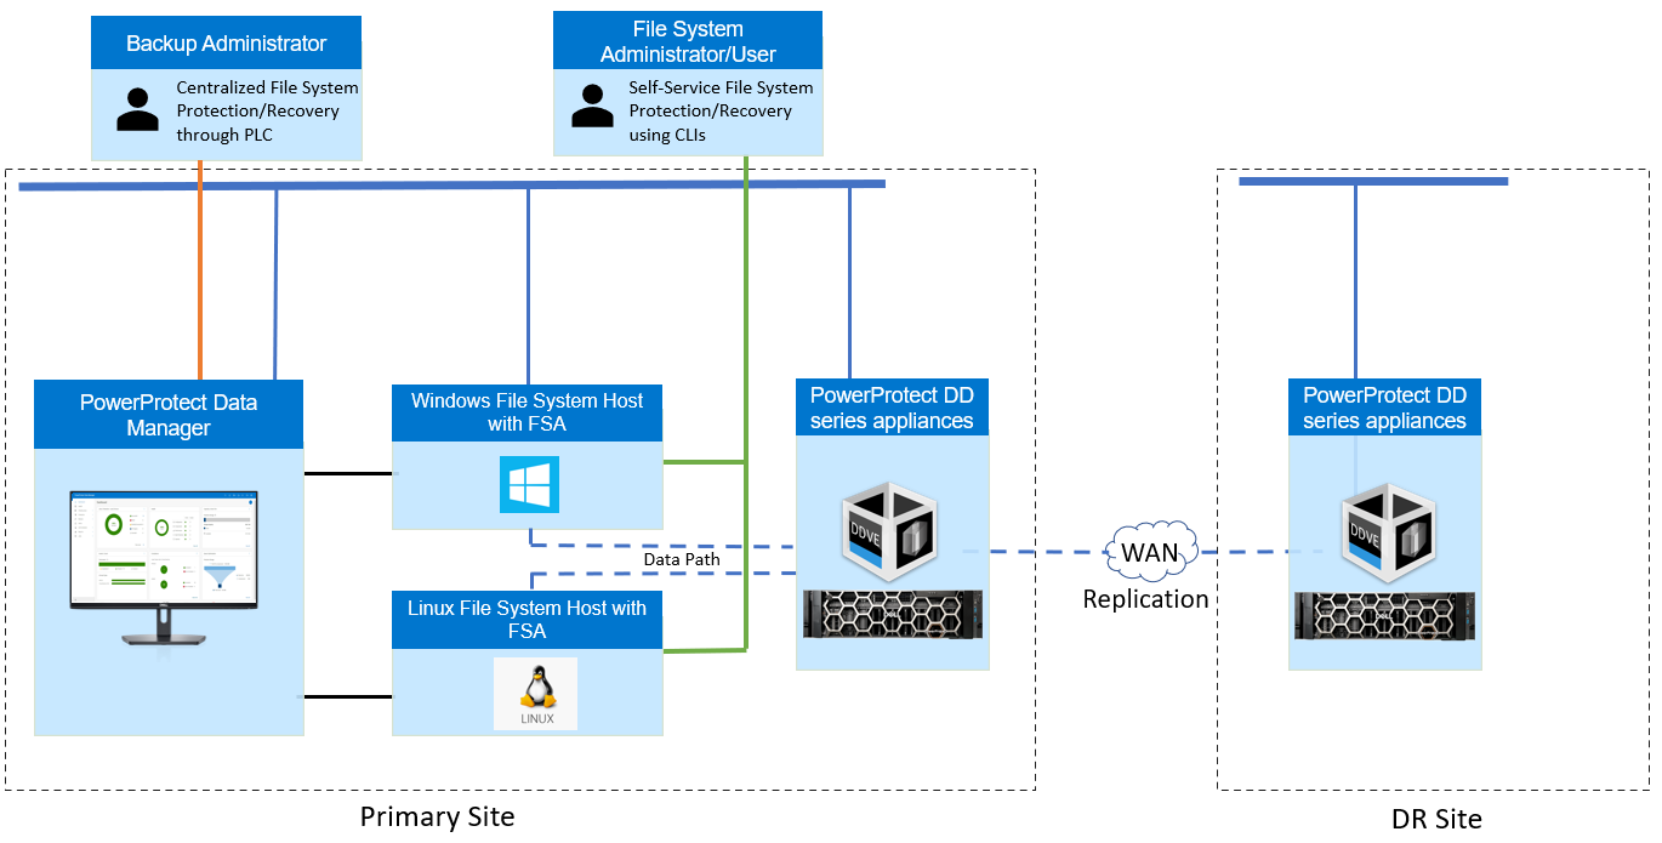 This image shows the Data Manager models for file system protection and recovery 